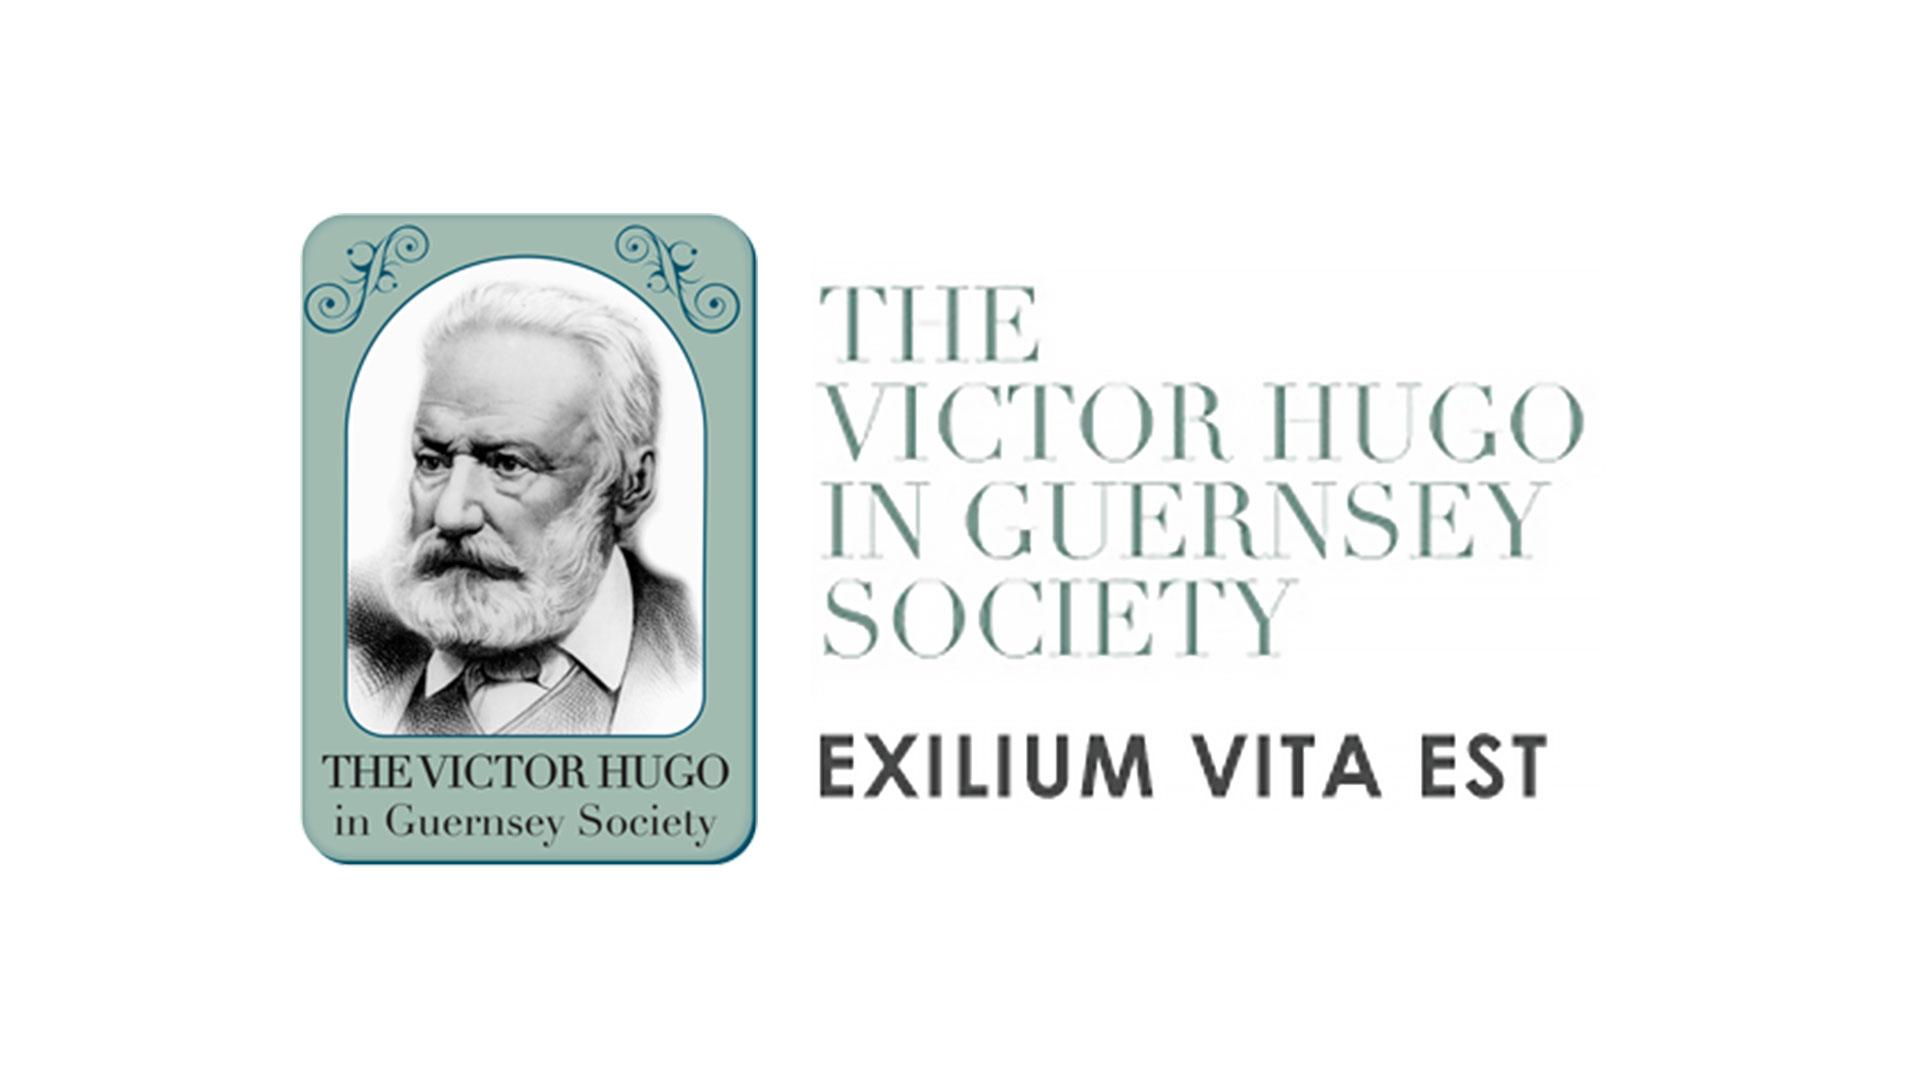 Join The Victor Hugo in Guernsey Society